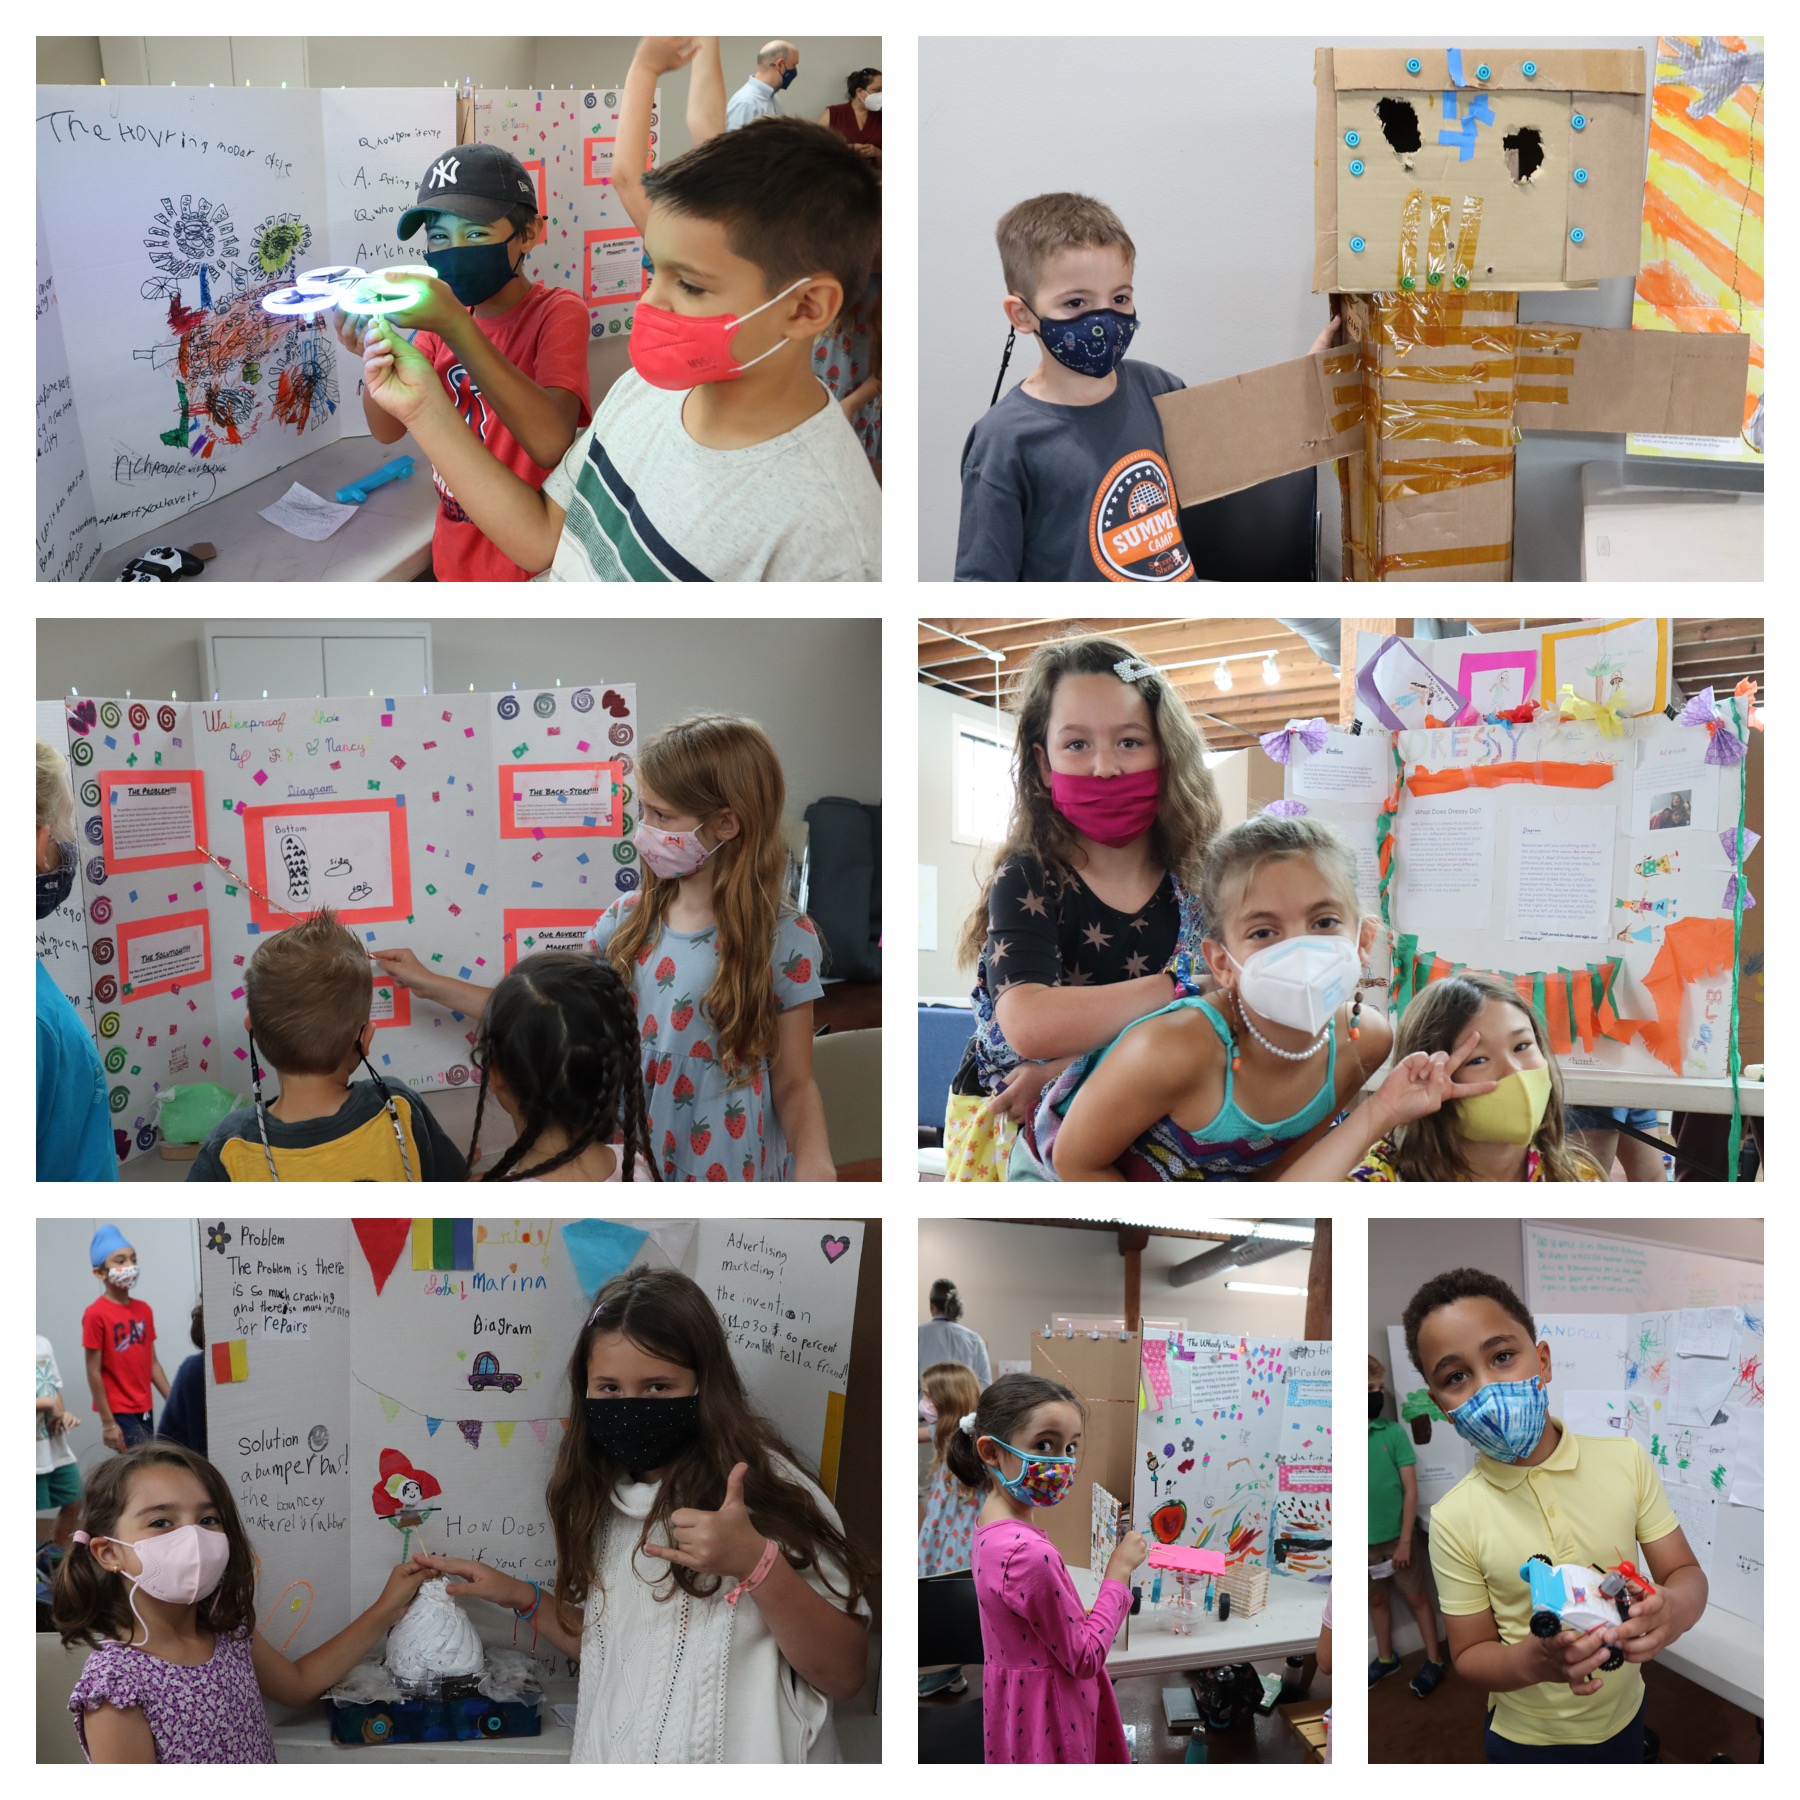 Lower Elementary’s Annual Invention Fair